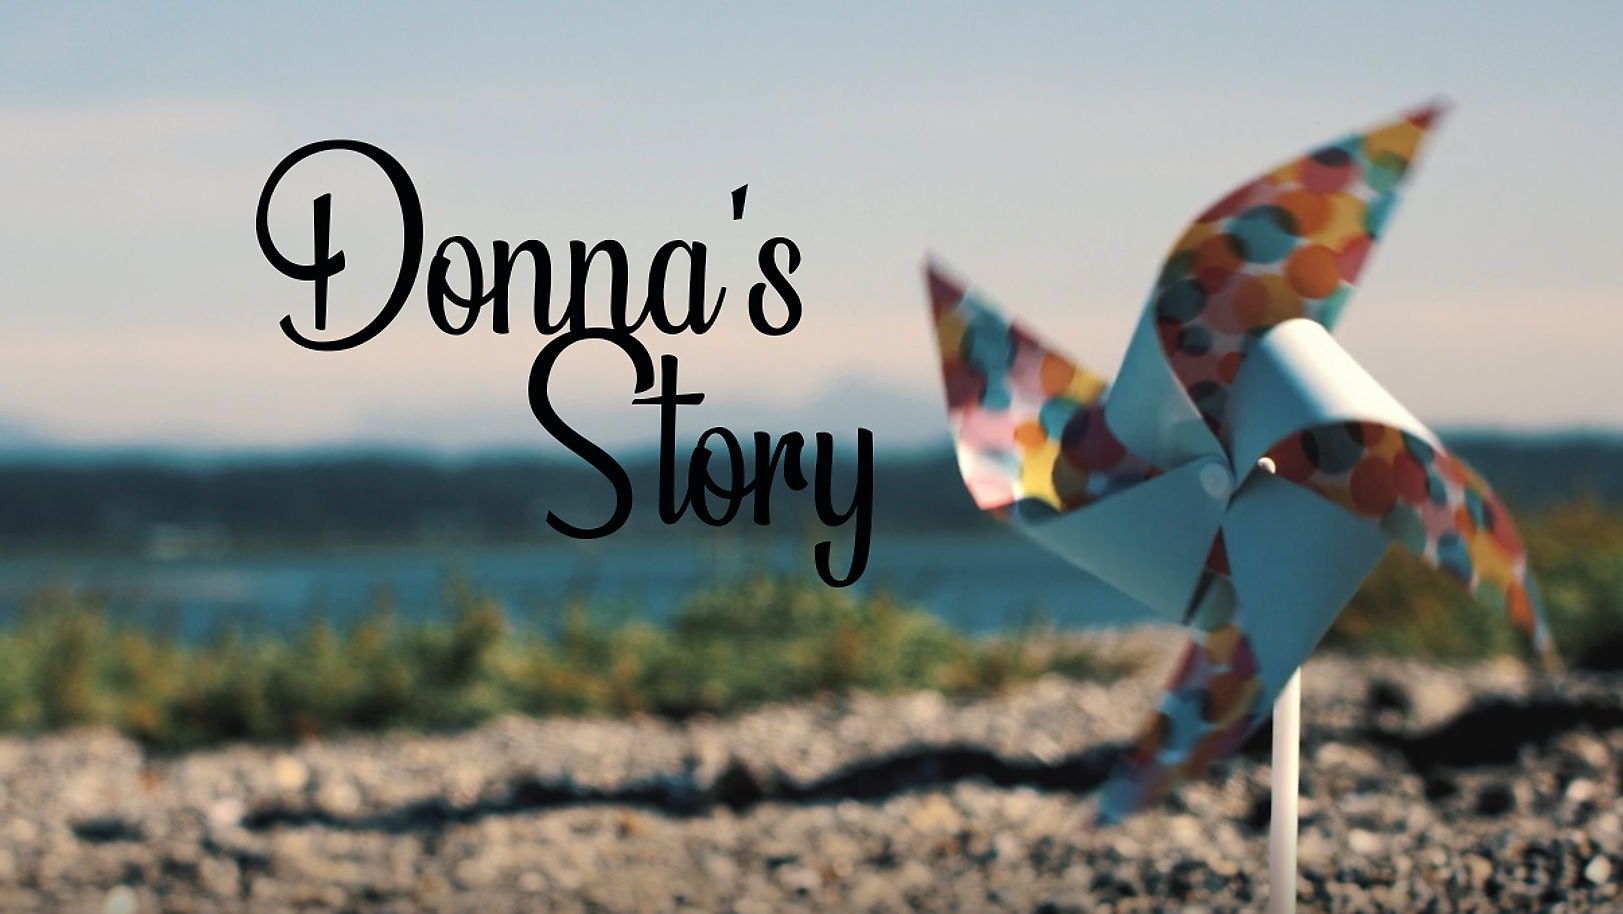 Donna's Story - Finding Hope After Loss